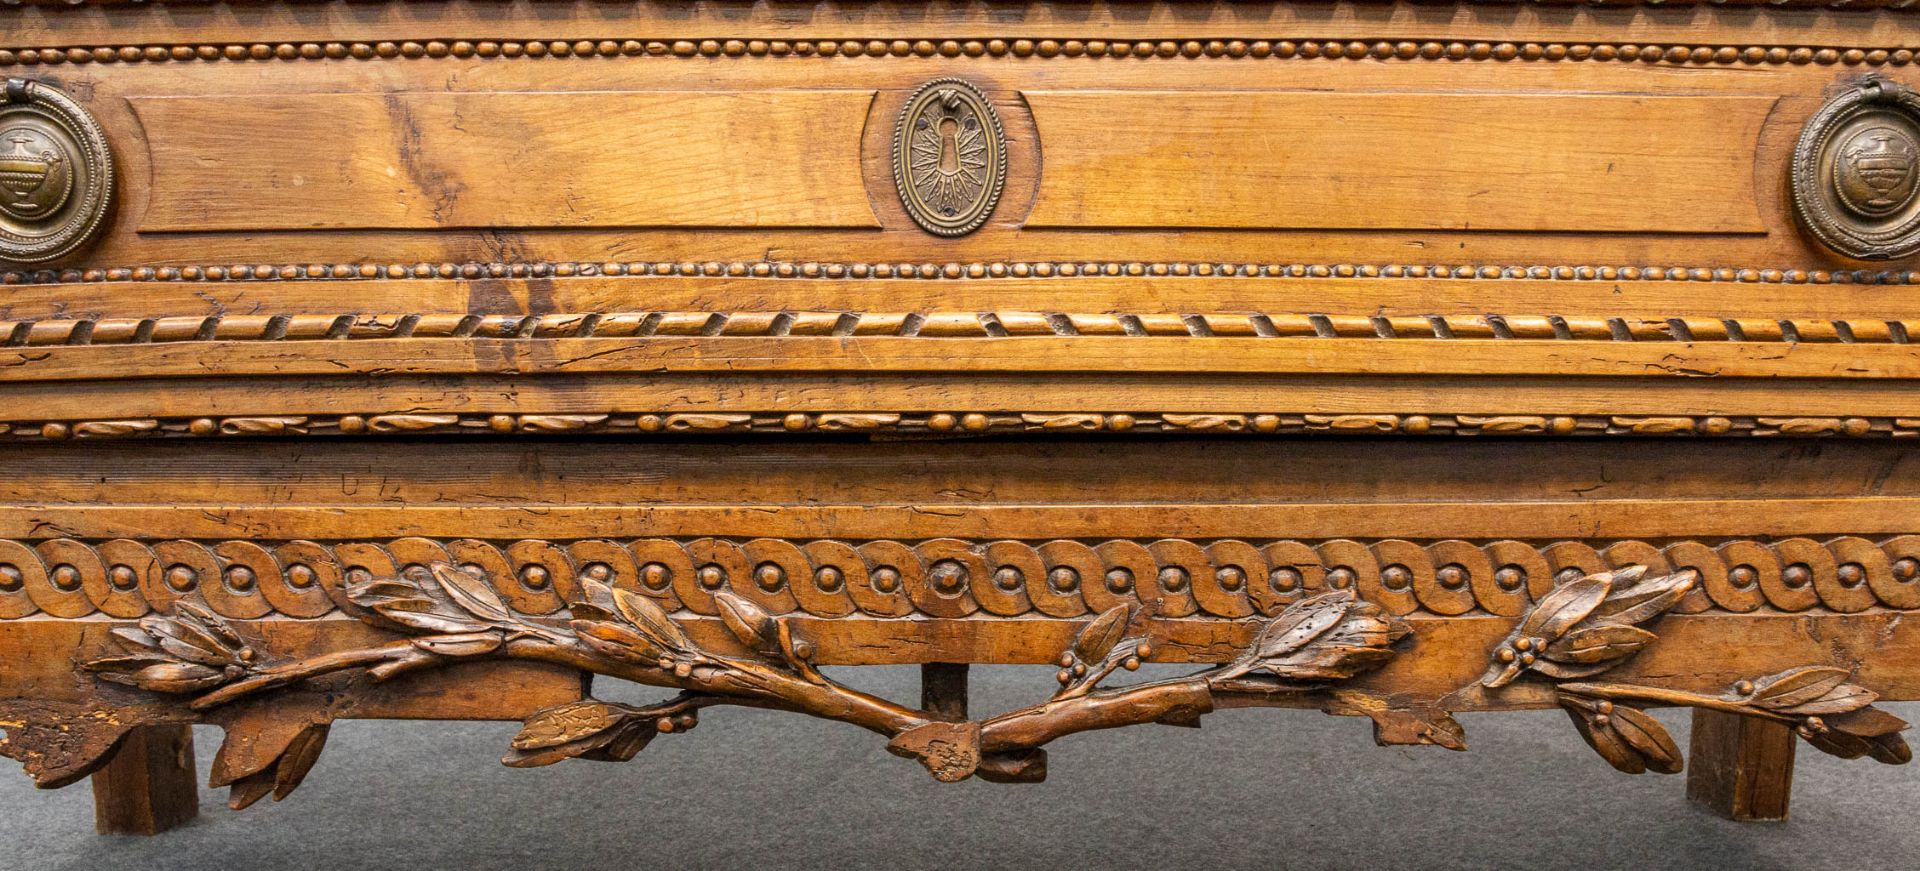 A wood sculptured commode in Louis XVI style, with 3 drawers and a hidden desk. 18th century. - Image 23 of 23